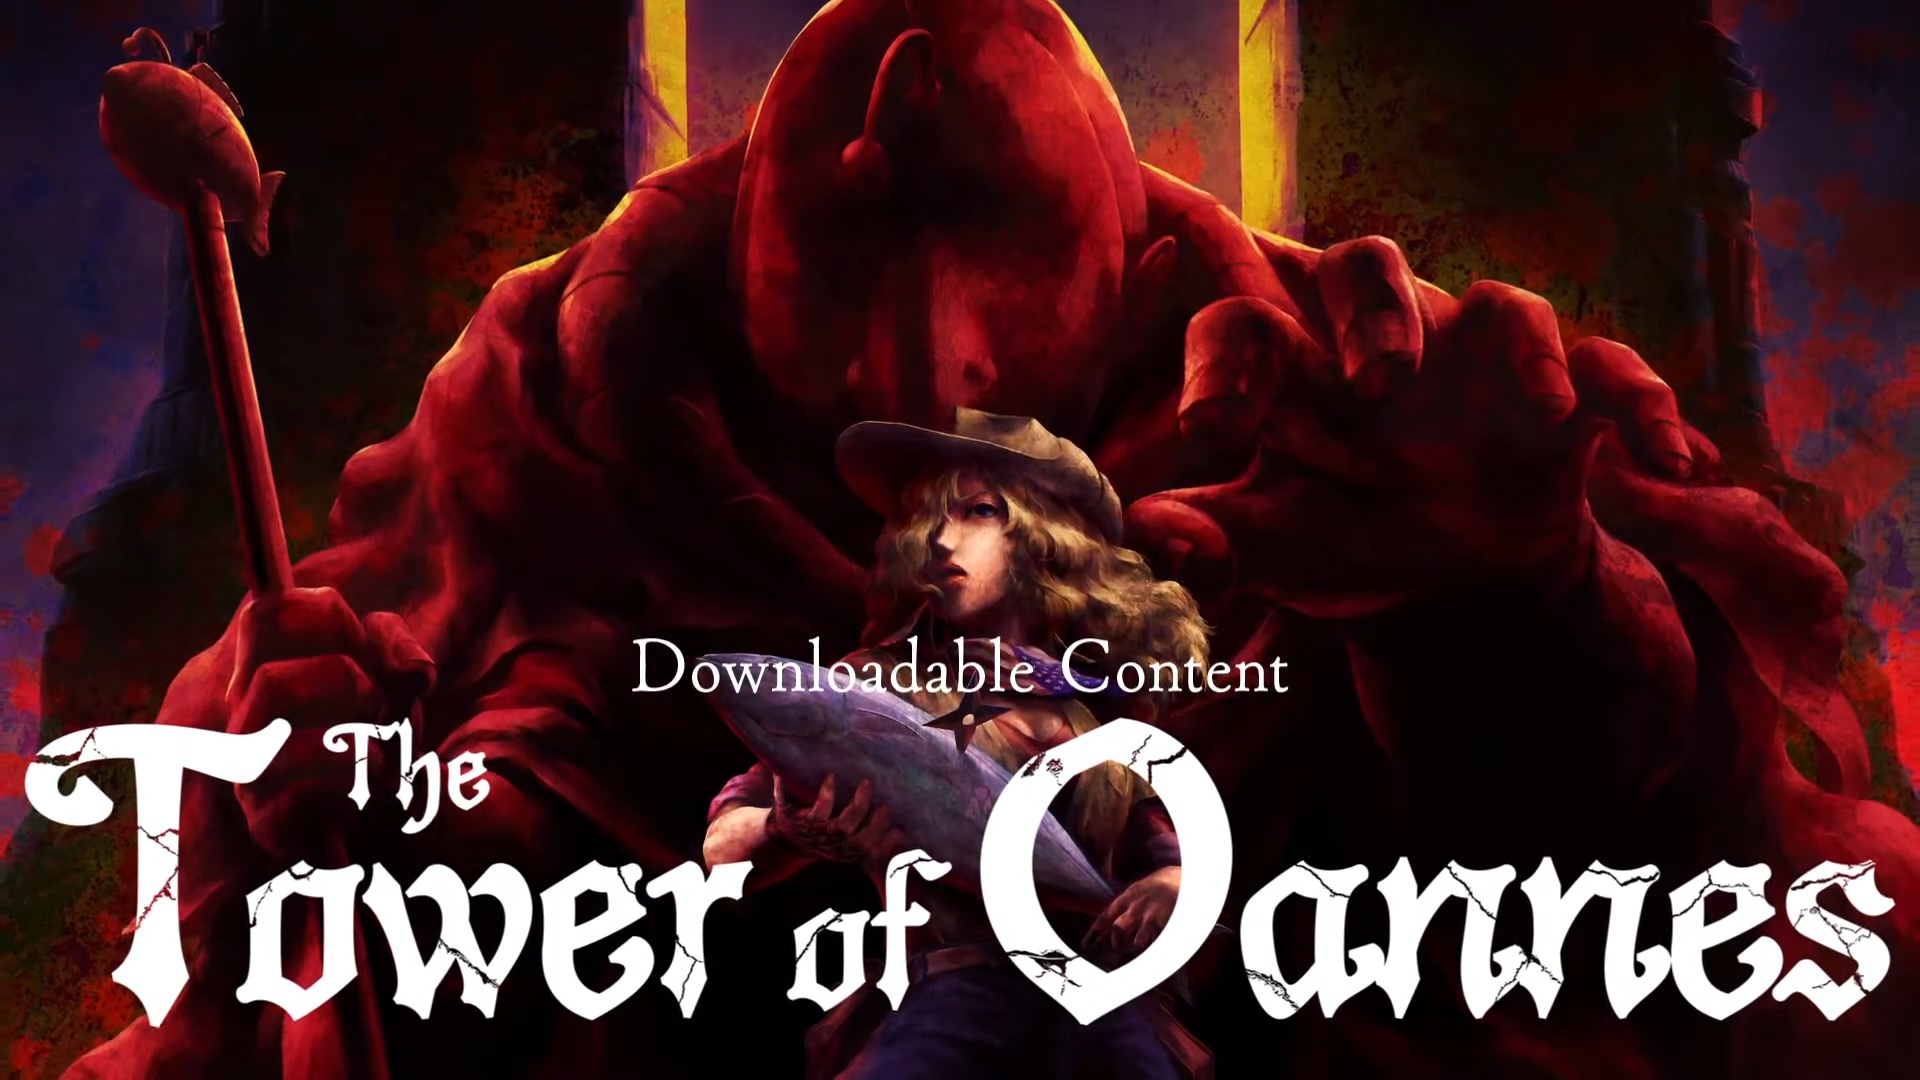 The Tower of Oannes is Now Available